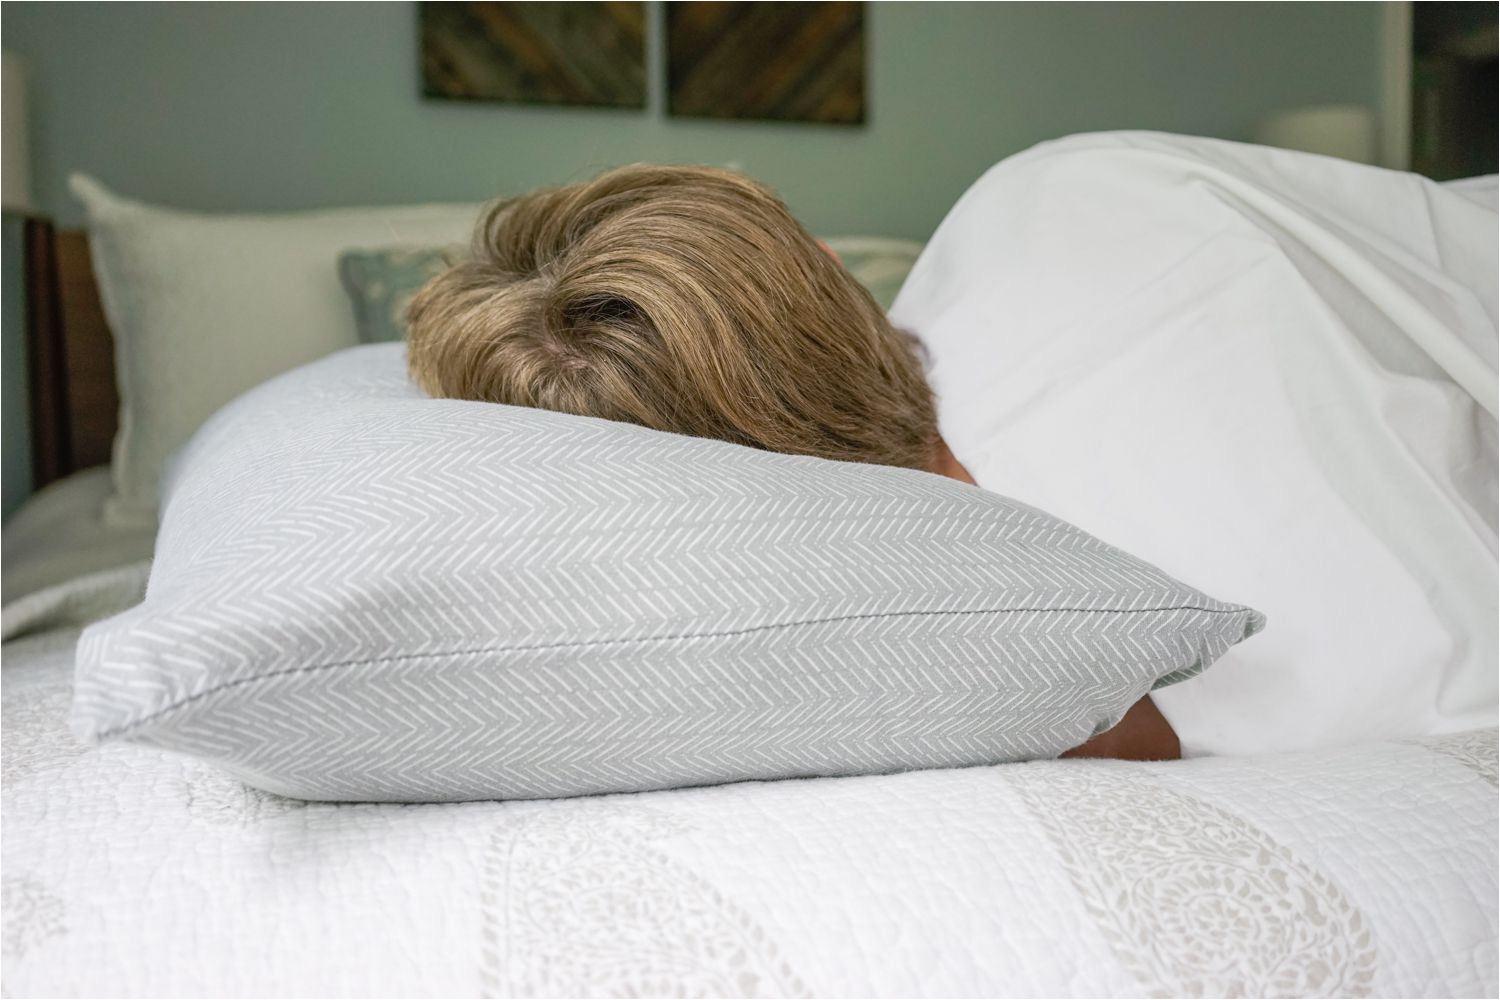 xtreme comforts hyperallergenic bamboo pillow